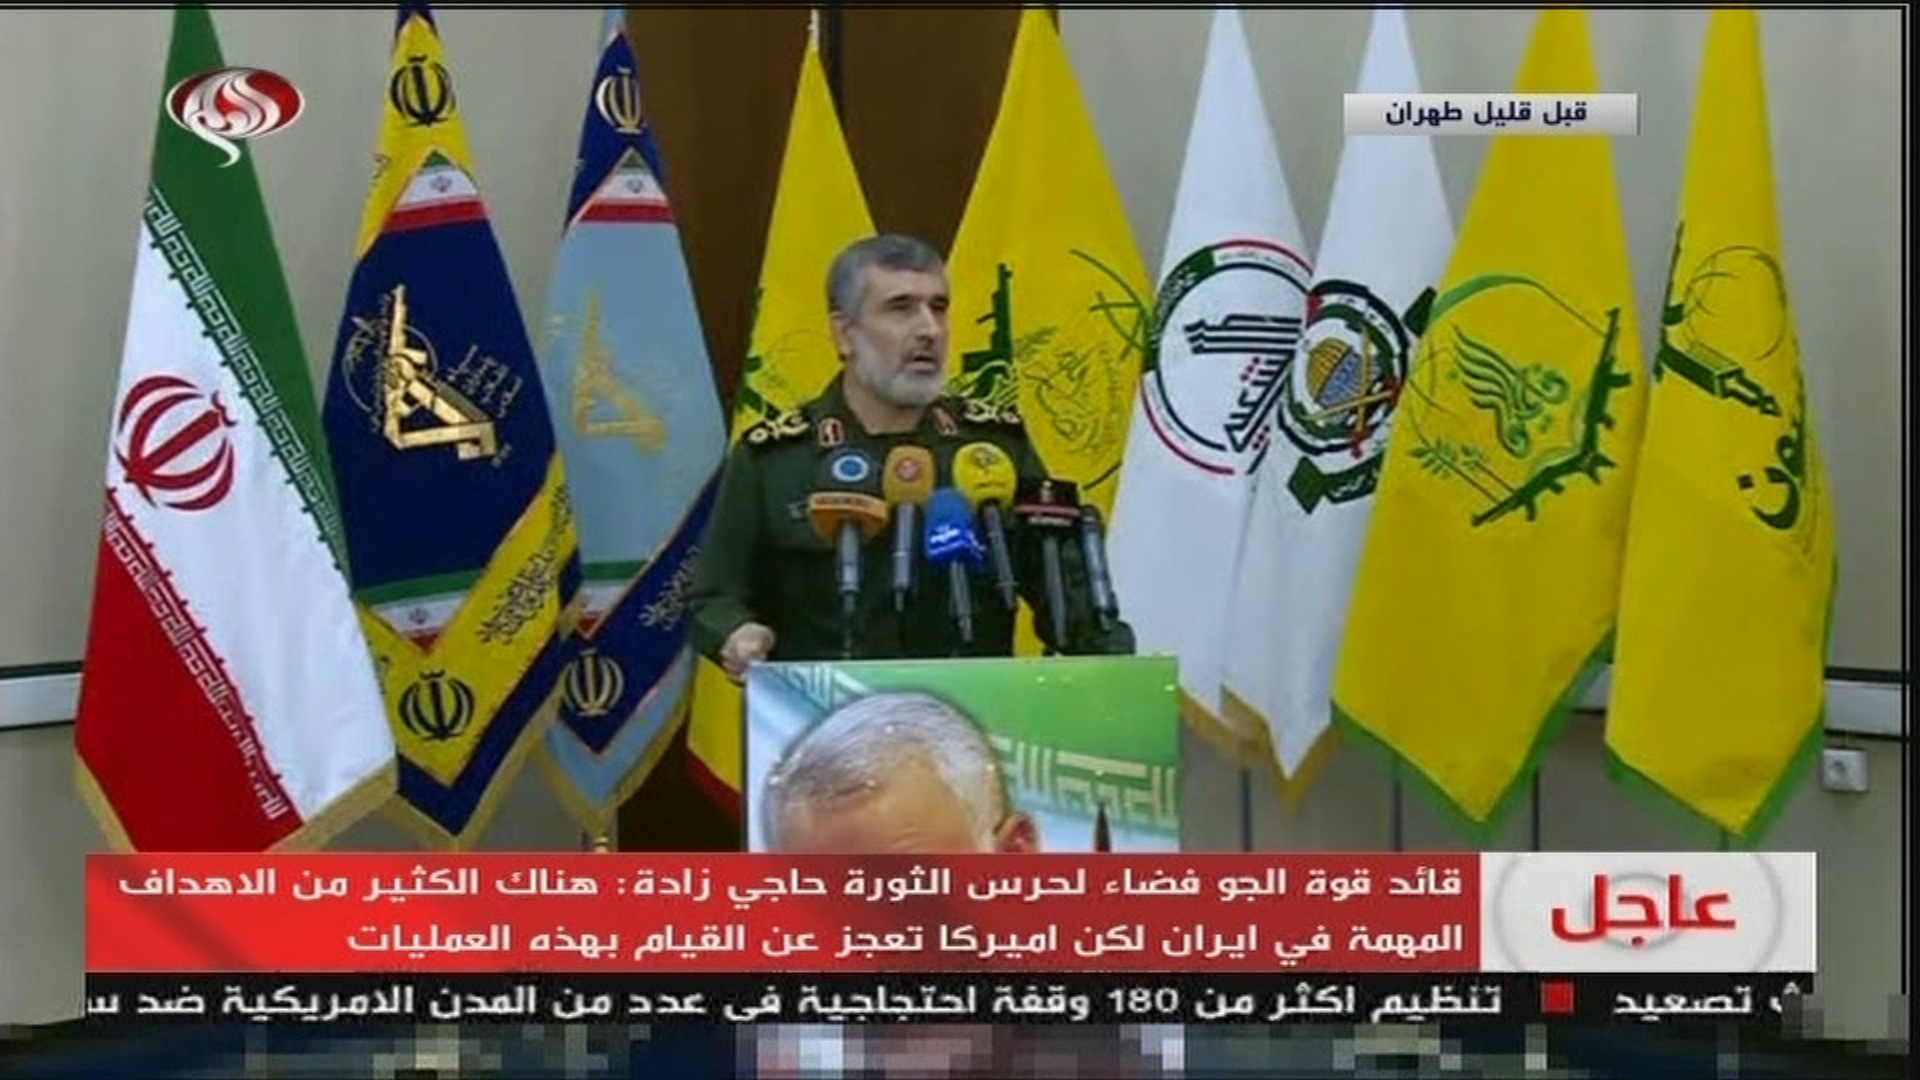 IRGC airforce commander Amir Ali Hajizadeh in front of proxy flags Iran on state TV, Jan 9 - Screengrab from Twitter